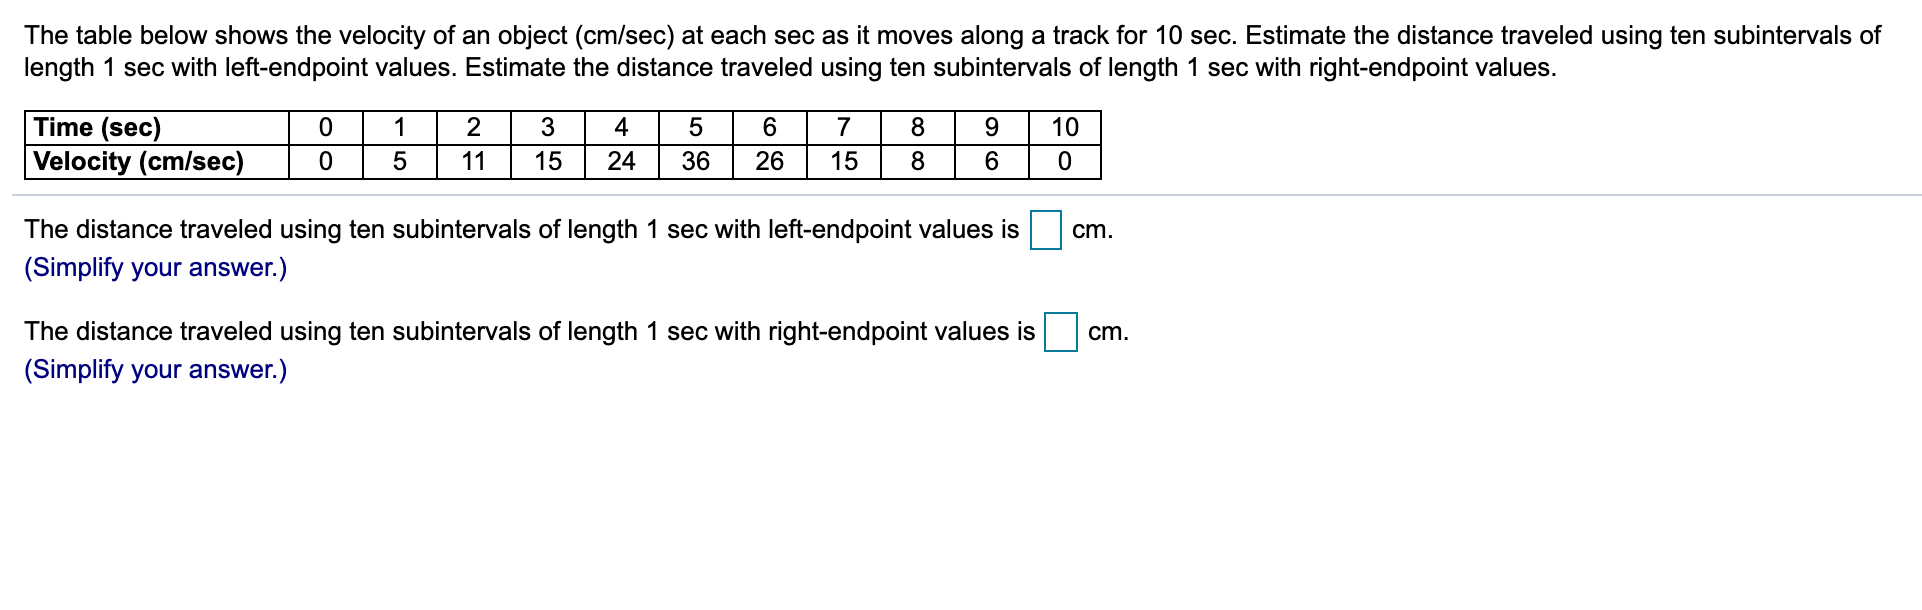 The table below shows the velocity of an object (cm/sec) at each sec as it moves along a track for 10 sec. Estimate the distance traveled using ten subintervals of
length 1 sec with left-endpoint values. Estimate the distance traveled using ten subintervals of length 1 sec with right-endpoint values.
Time (sec)
Velocity (cm/sec)
3
4
7
8.
9.
10
11
15
24
36
26
15
6
The distance traveled using ten subintervals of length 1 sec with left-endpoint values is
cm.
(Simplify your answer.)
The distance traveled using ten subintervals of length 1 sec with right-endpoint values is
cm.
(Simplify your answer.)
